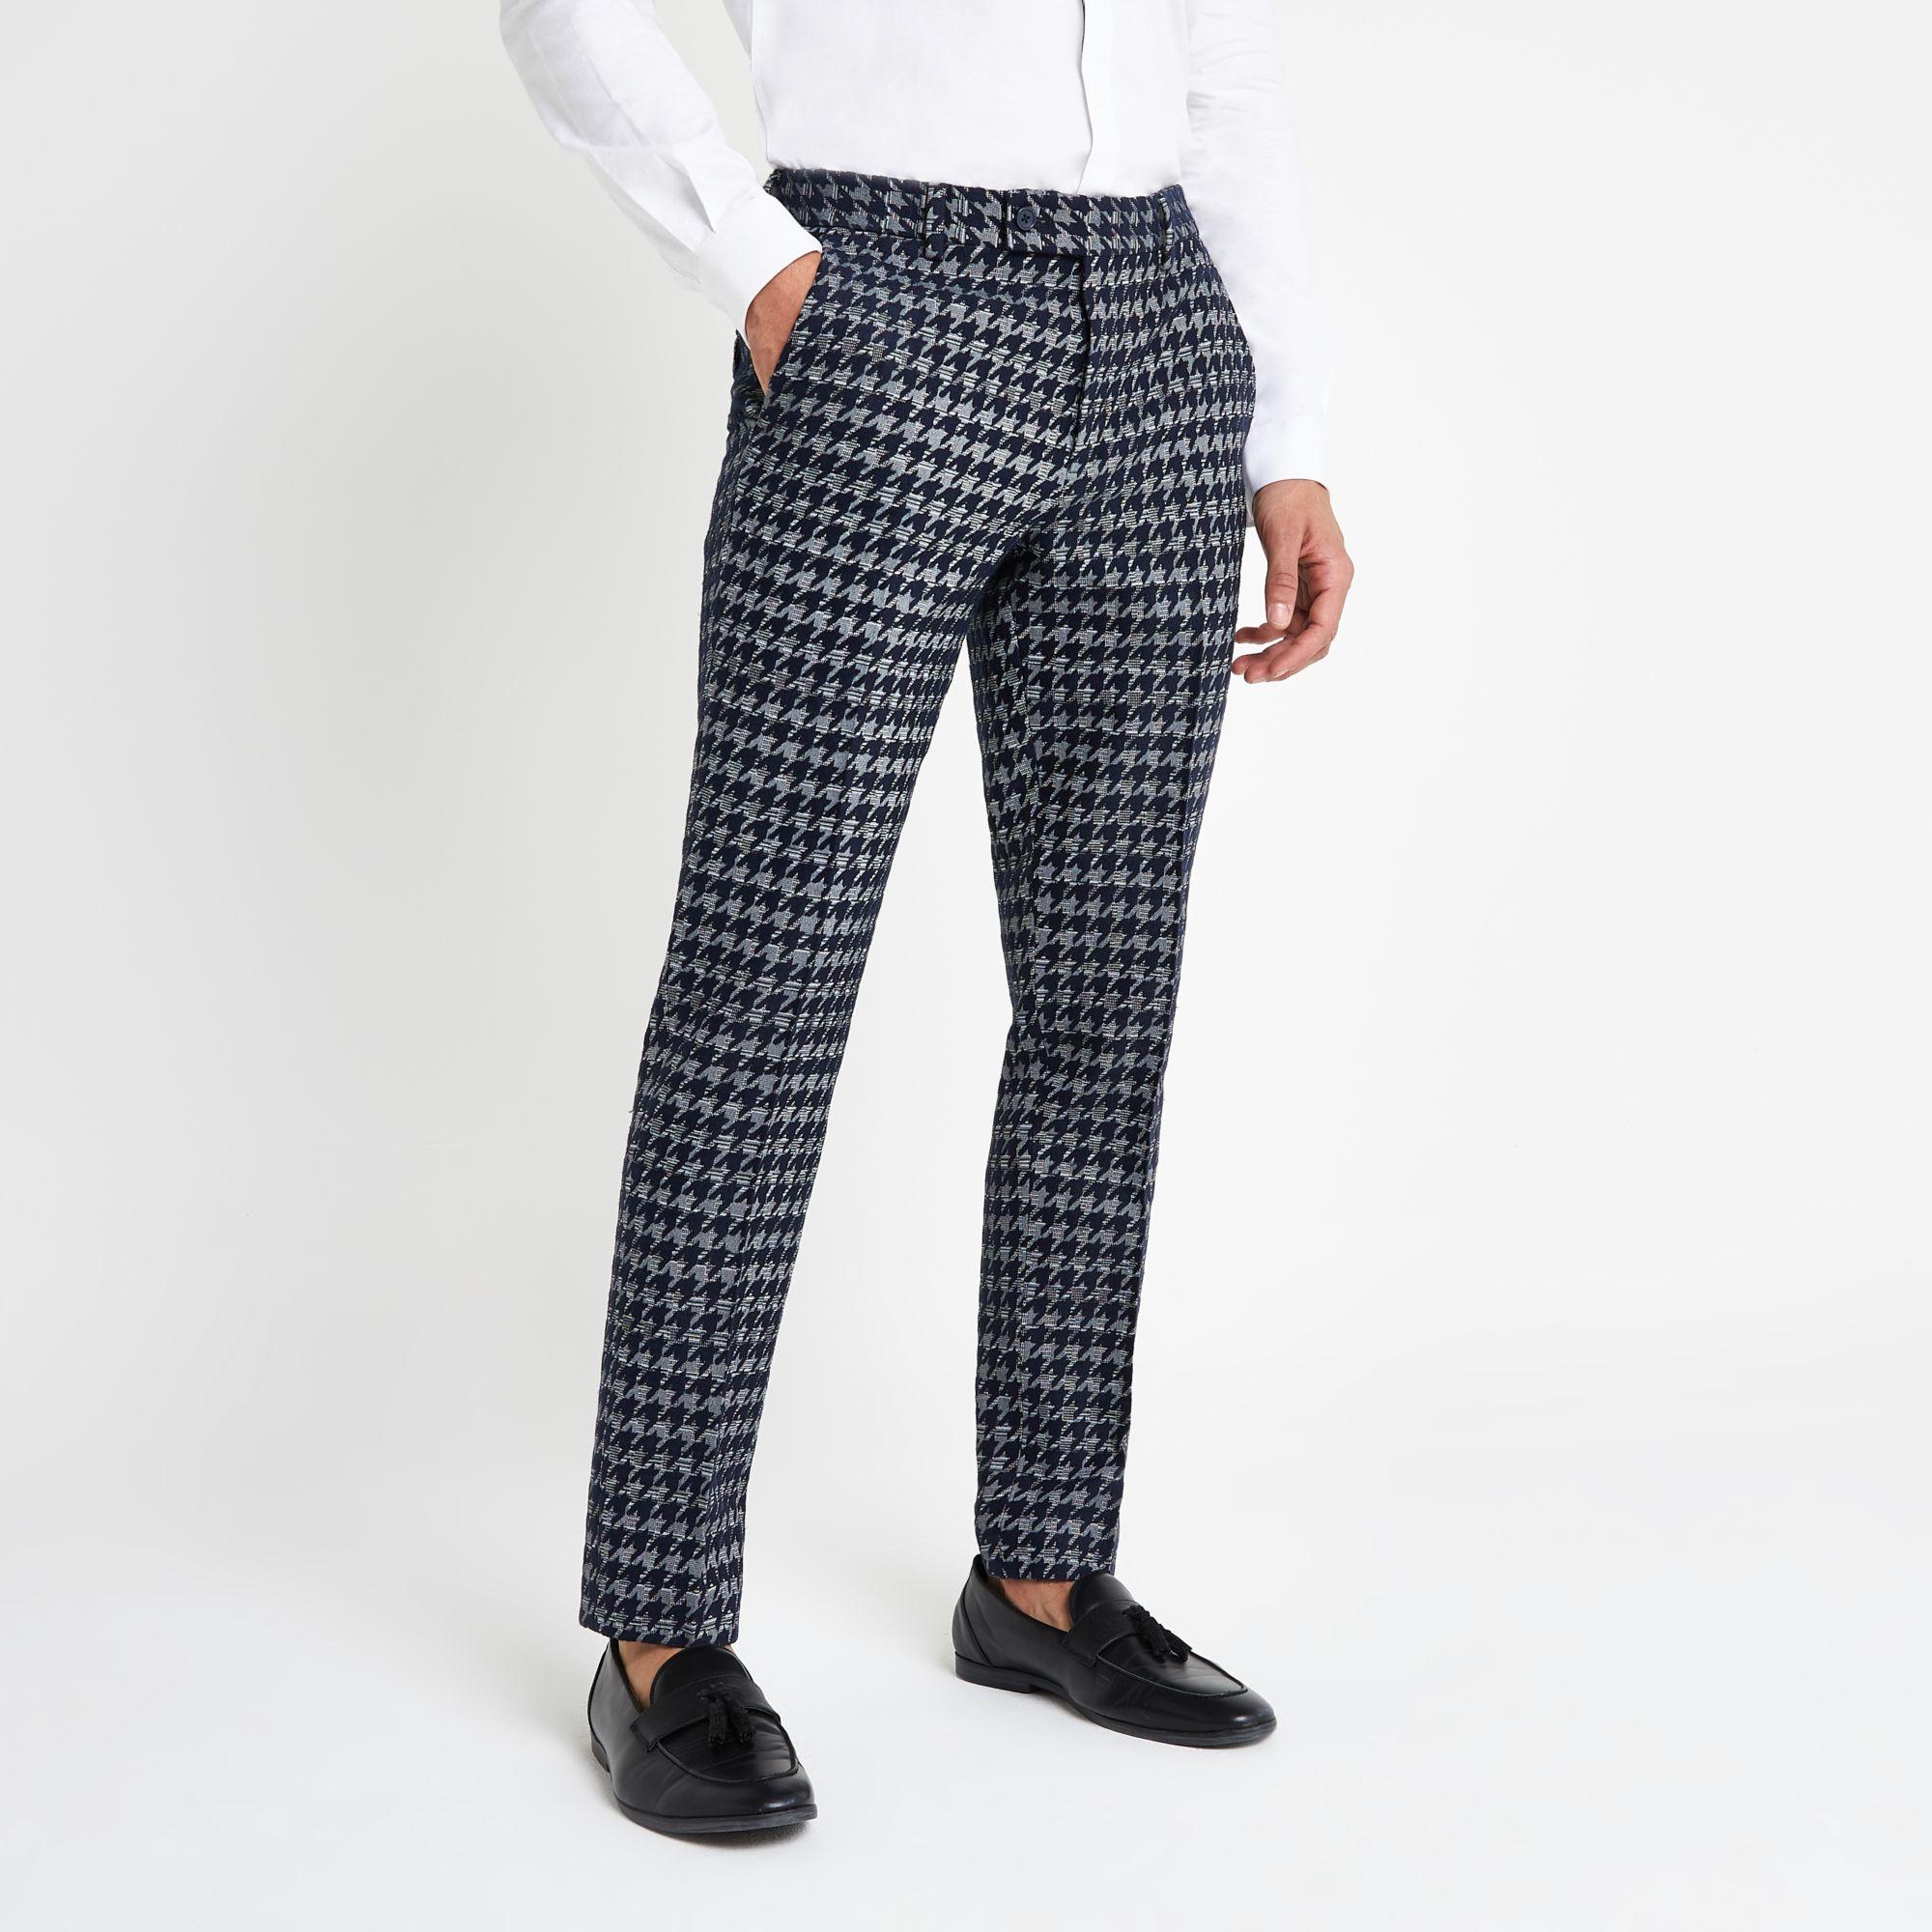 River Island Dogtooth Check Skinny Fit Smart Trousers in Grey (Gray ...